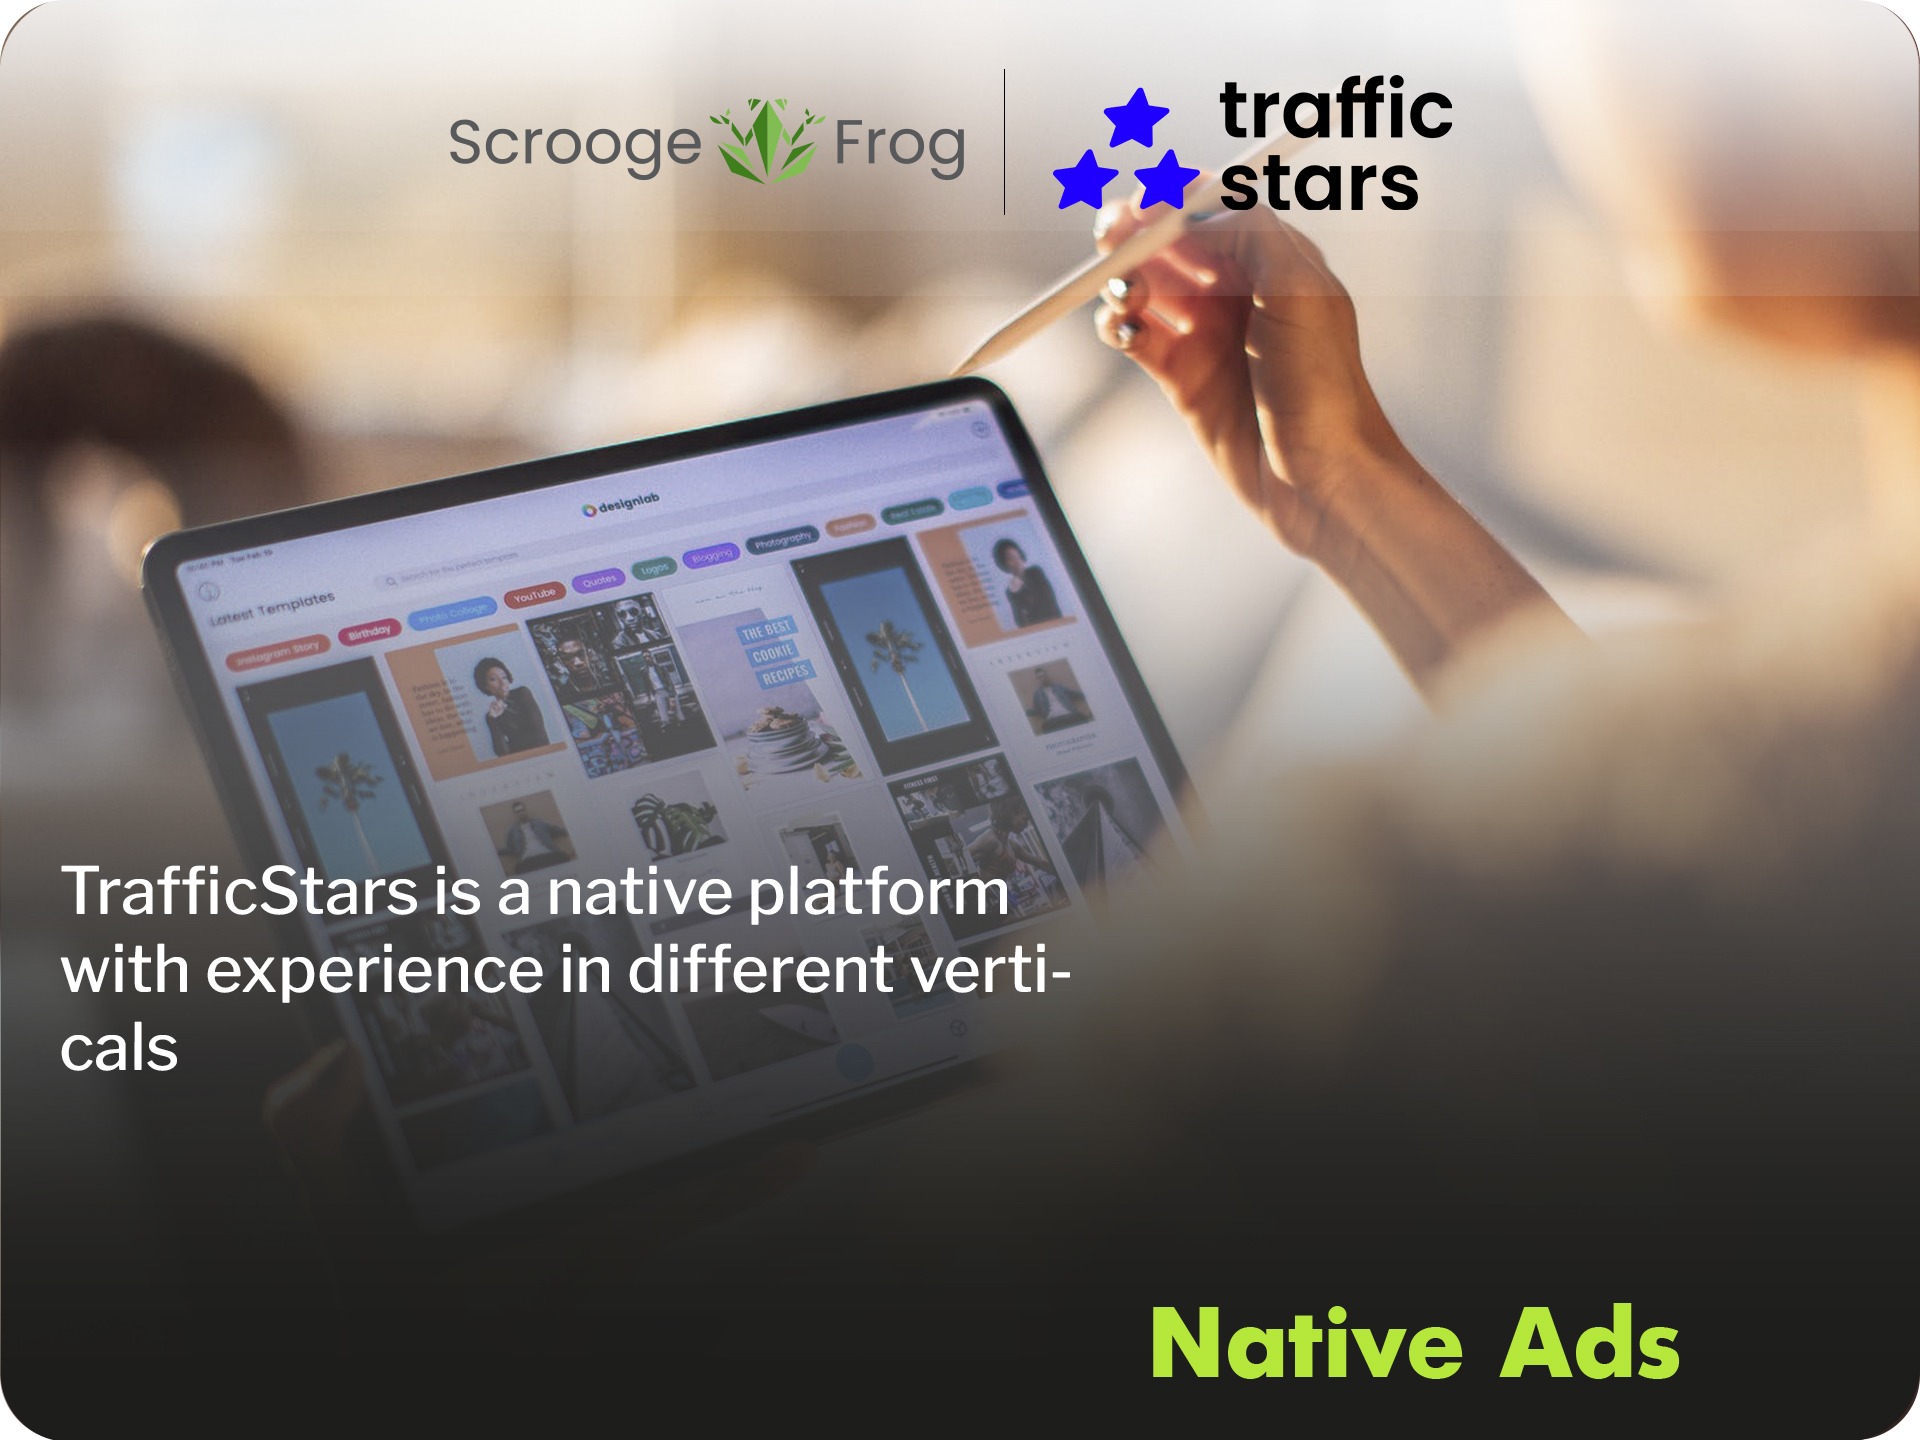 TrafficStars is a native platform with experience in different verticals